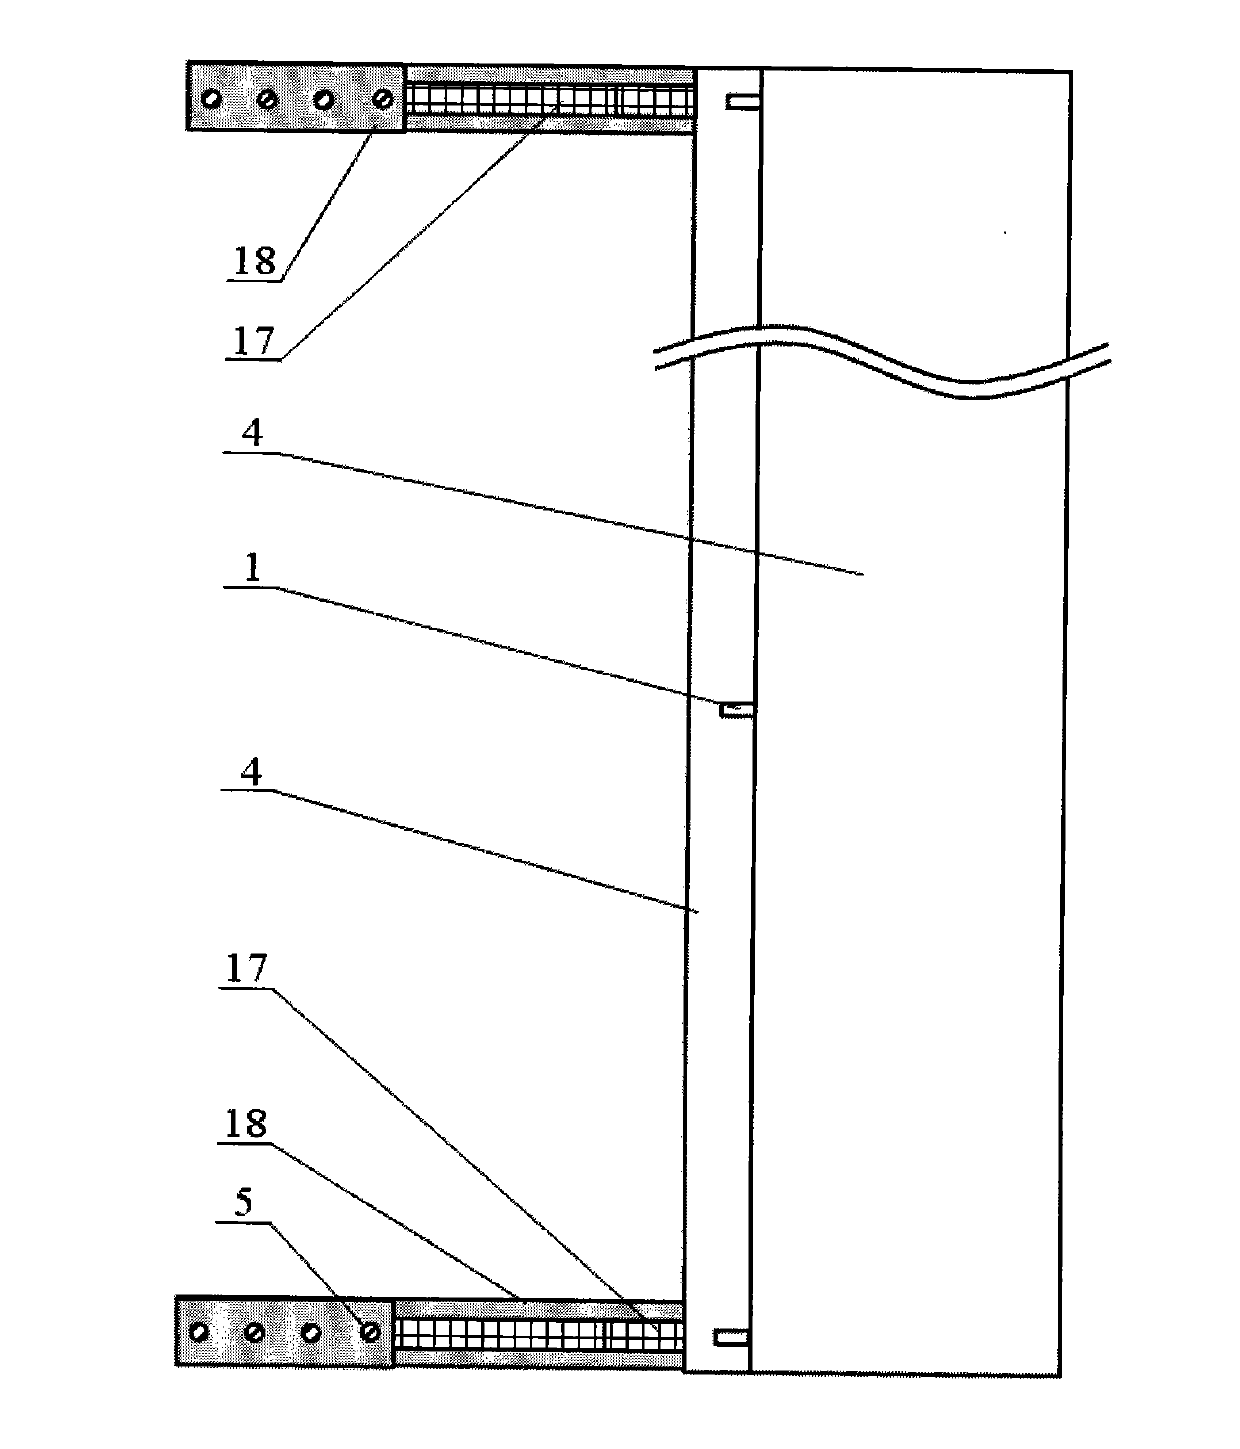 Method for preparing stone blocking dam by using waste and old rubber